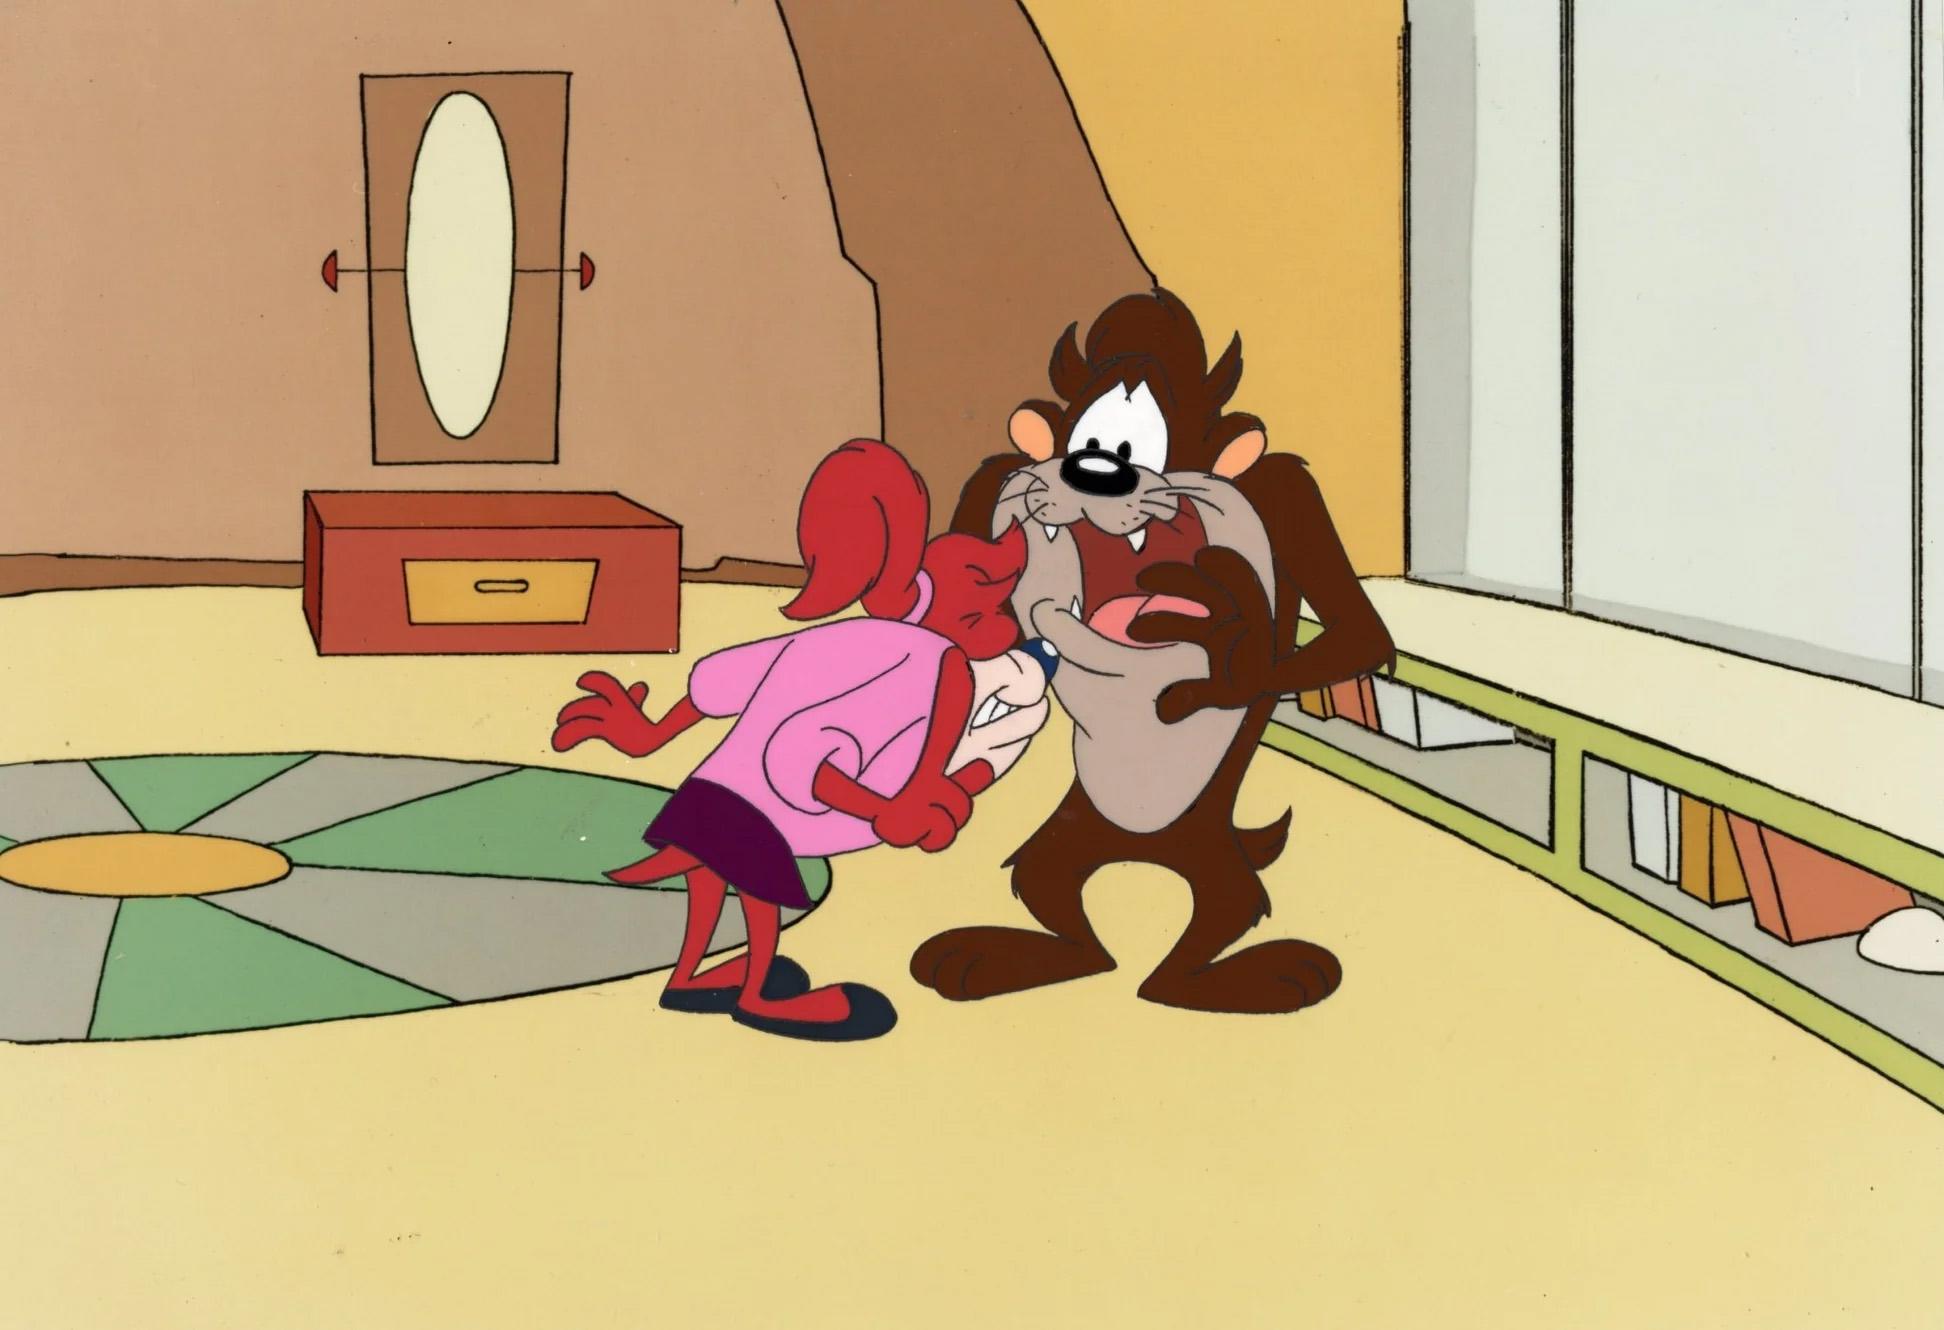 Looney Tunes Original Production Cel: Taz and Molly - Art by Looney Tunes Studio Artists